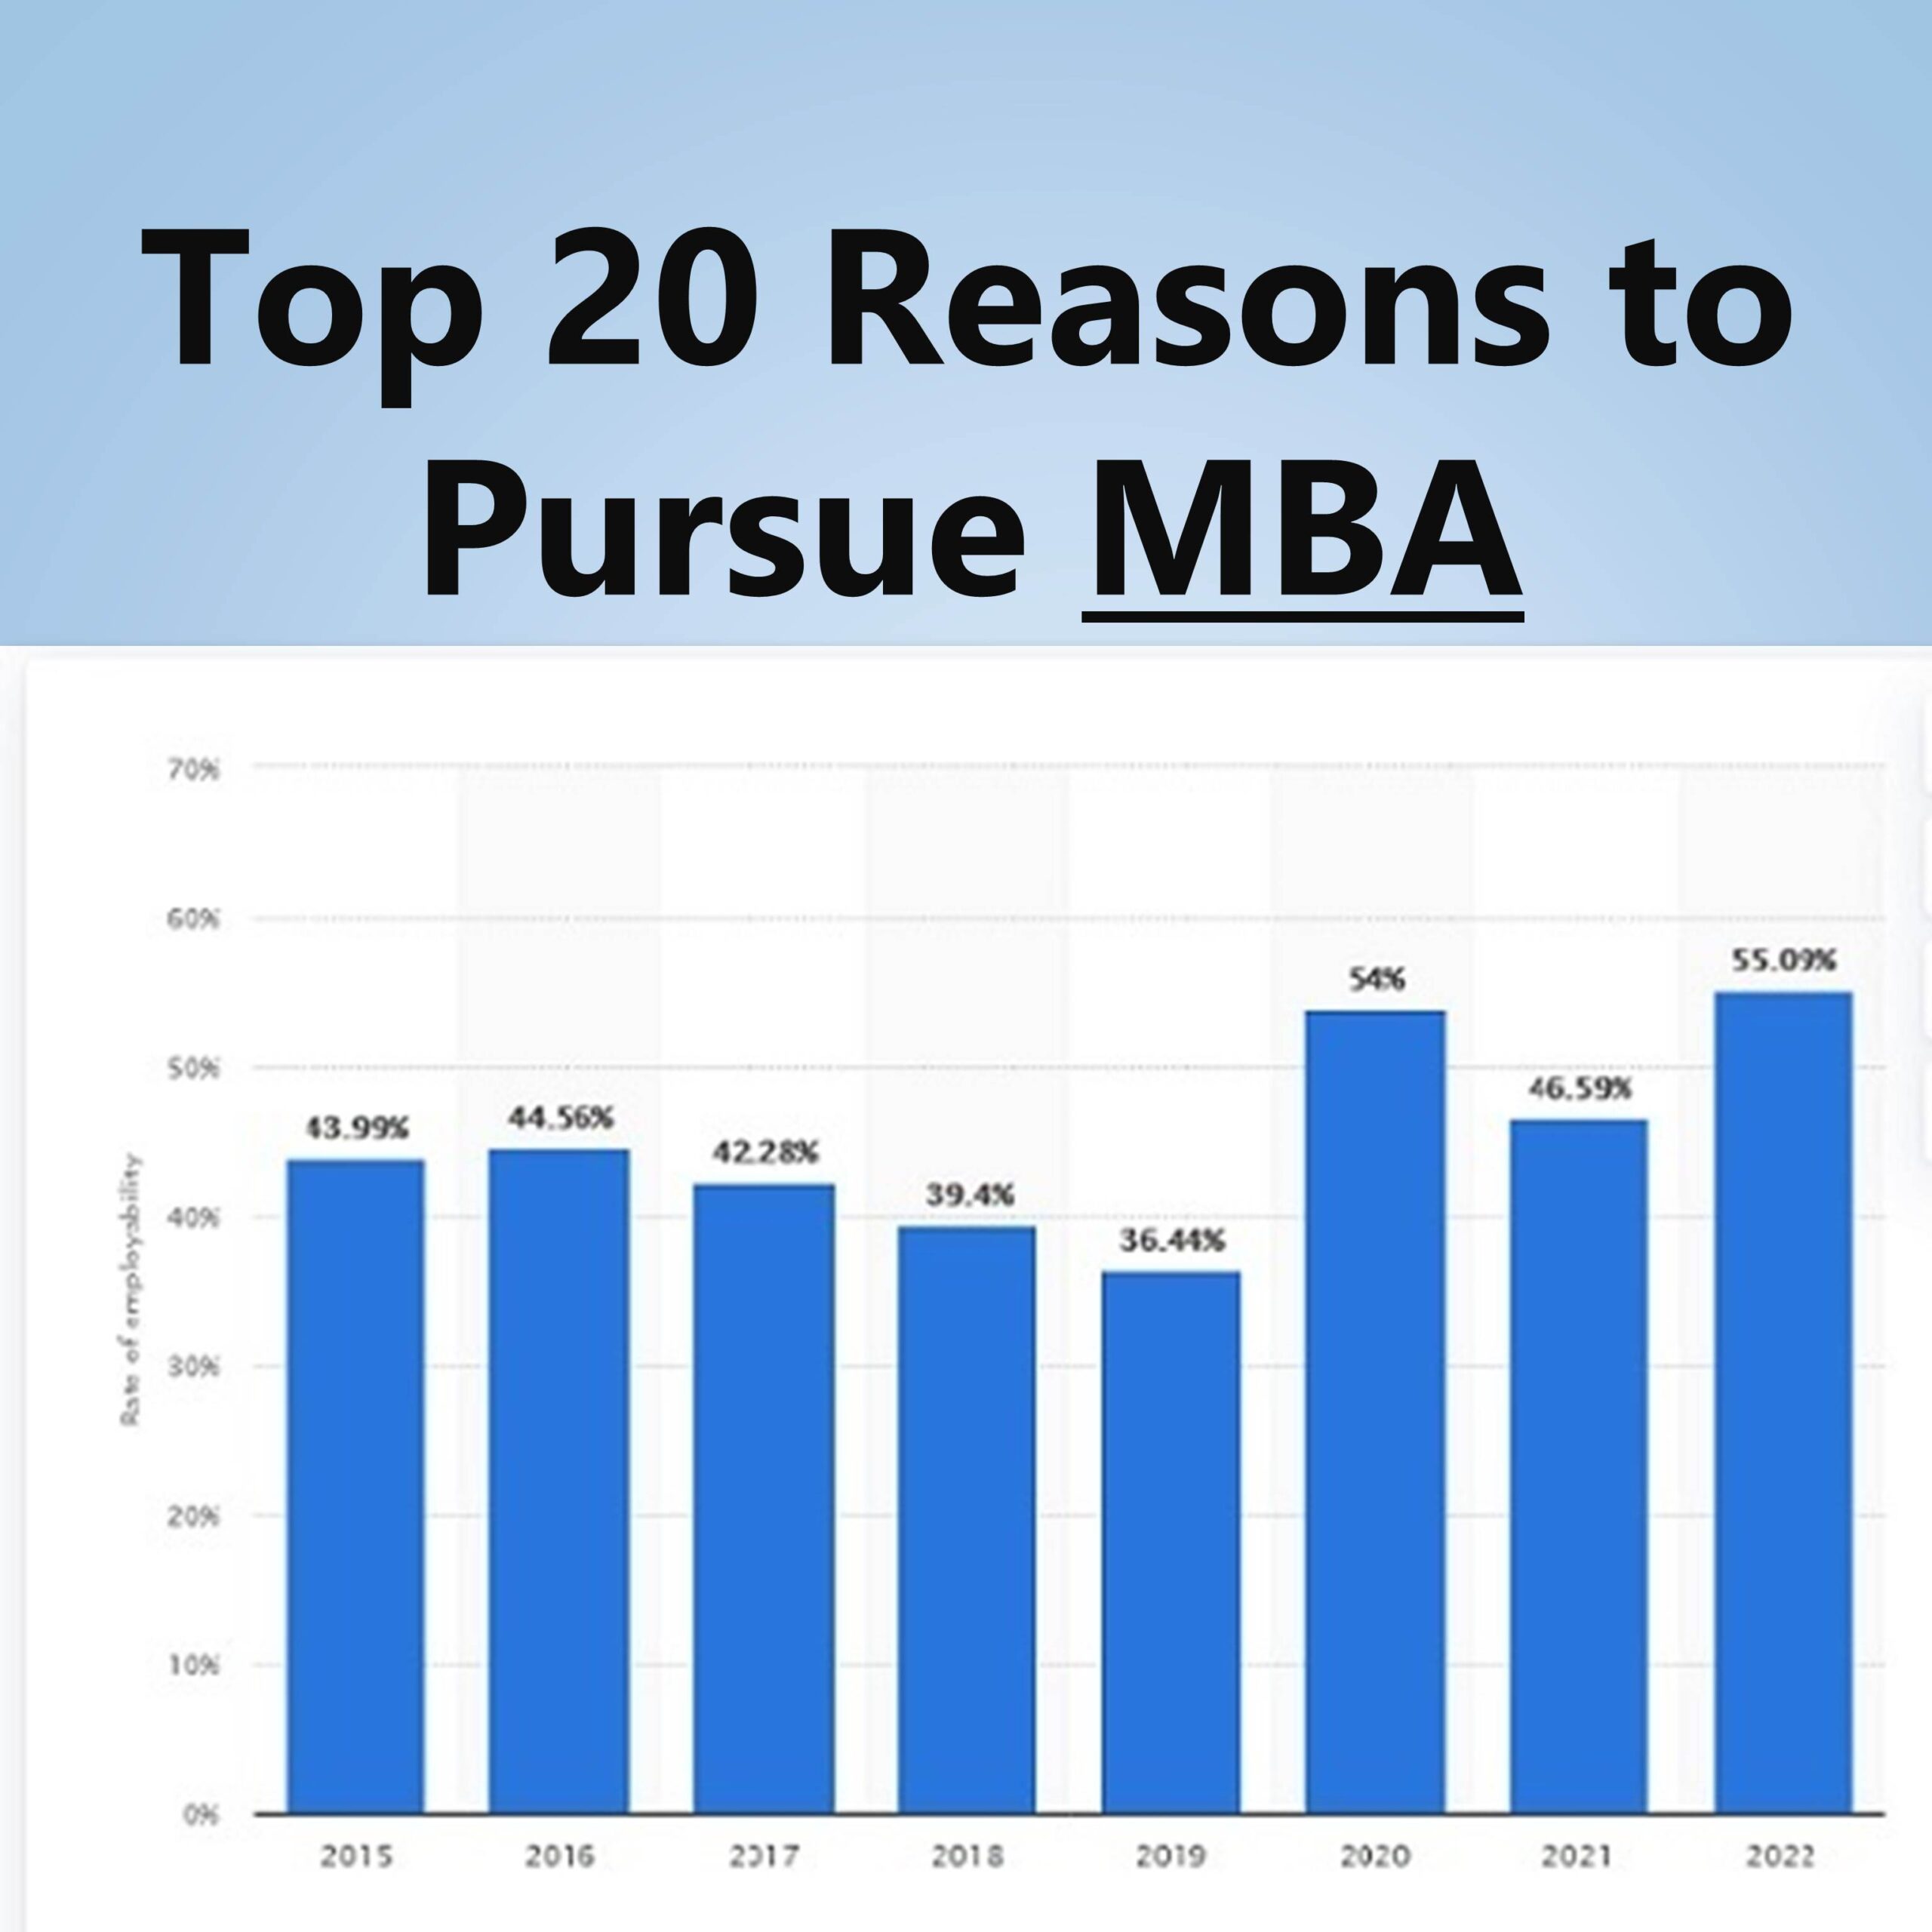 Top 20 Reasons to Pursue MBA